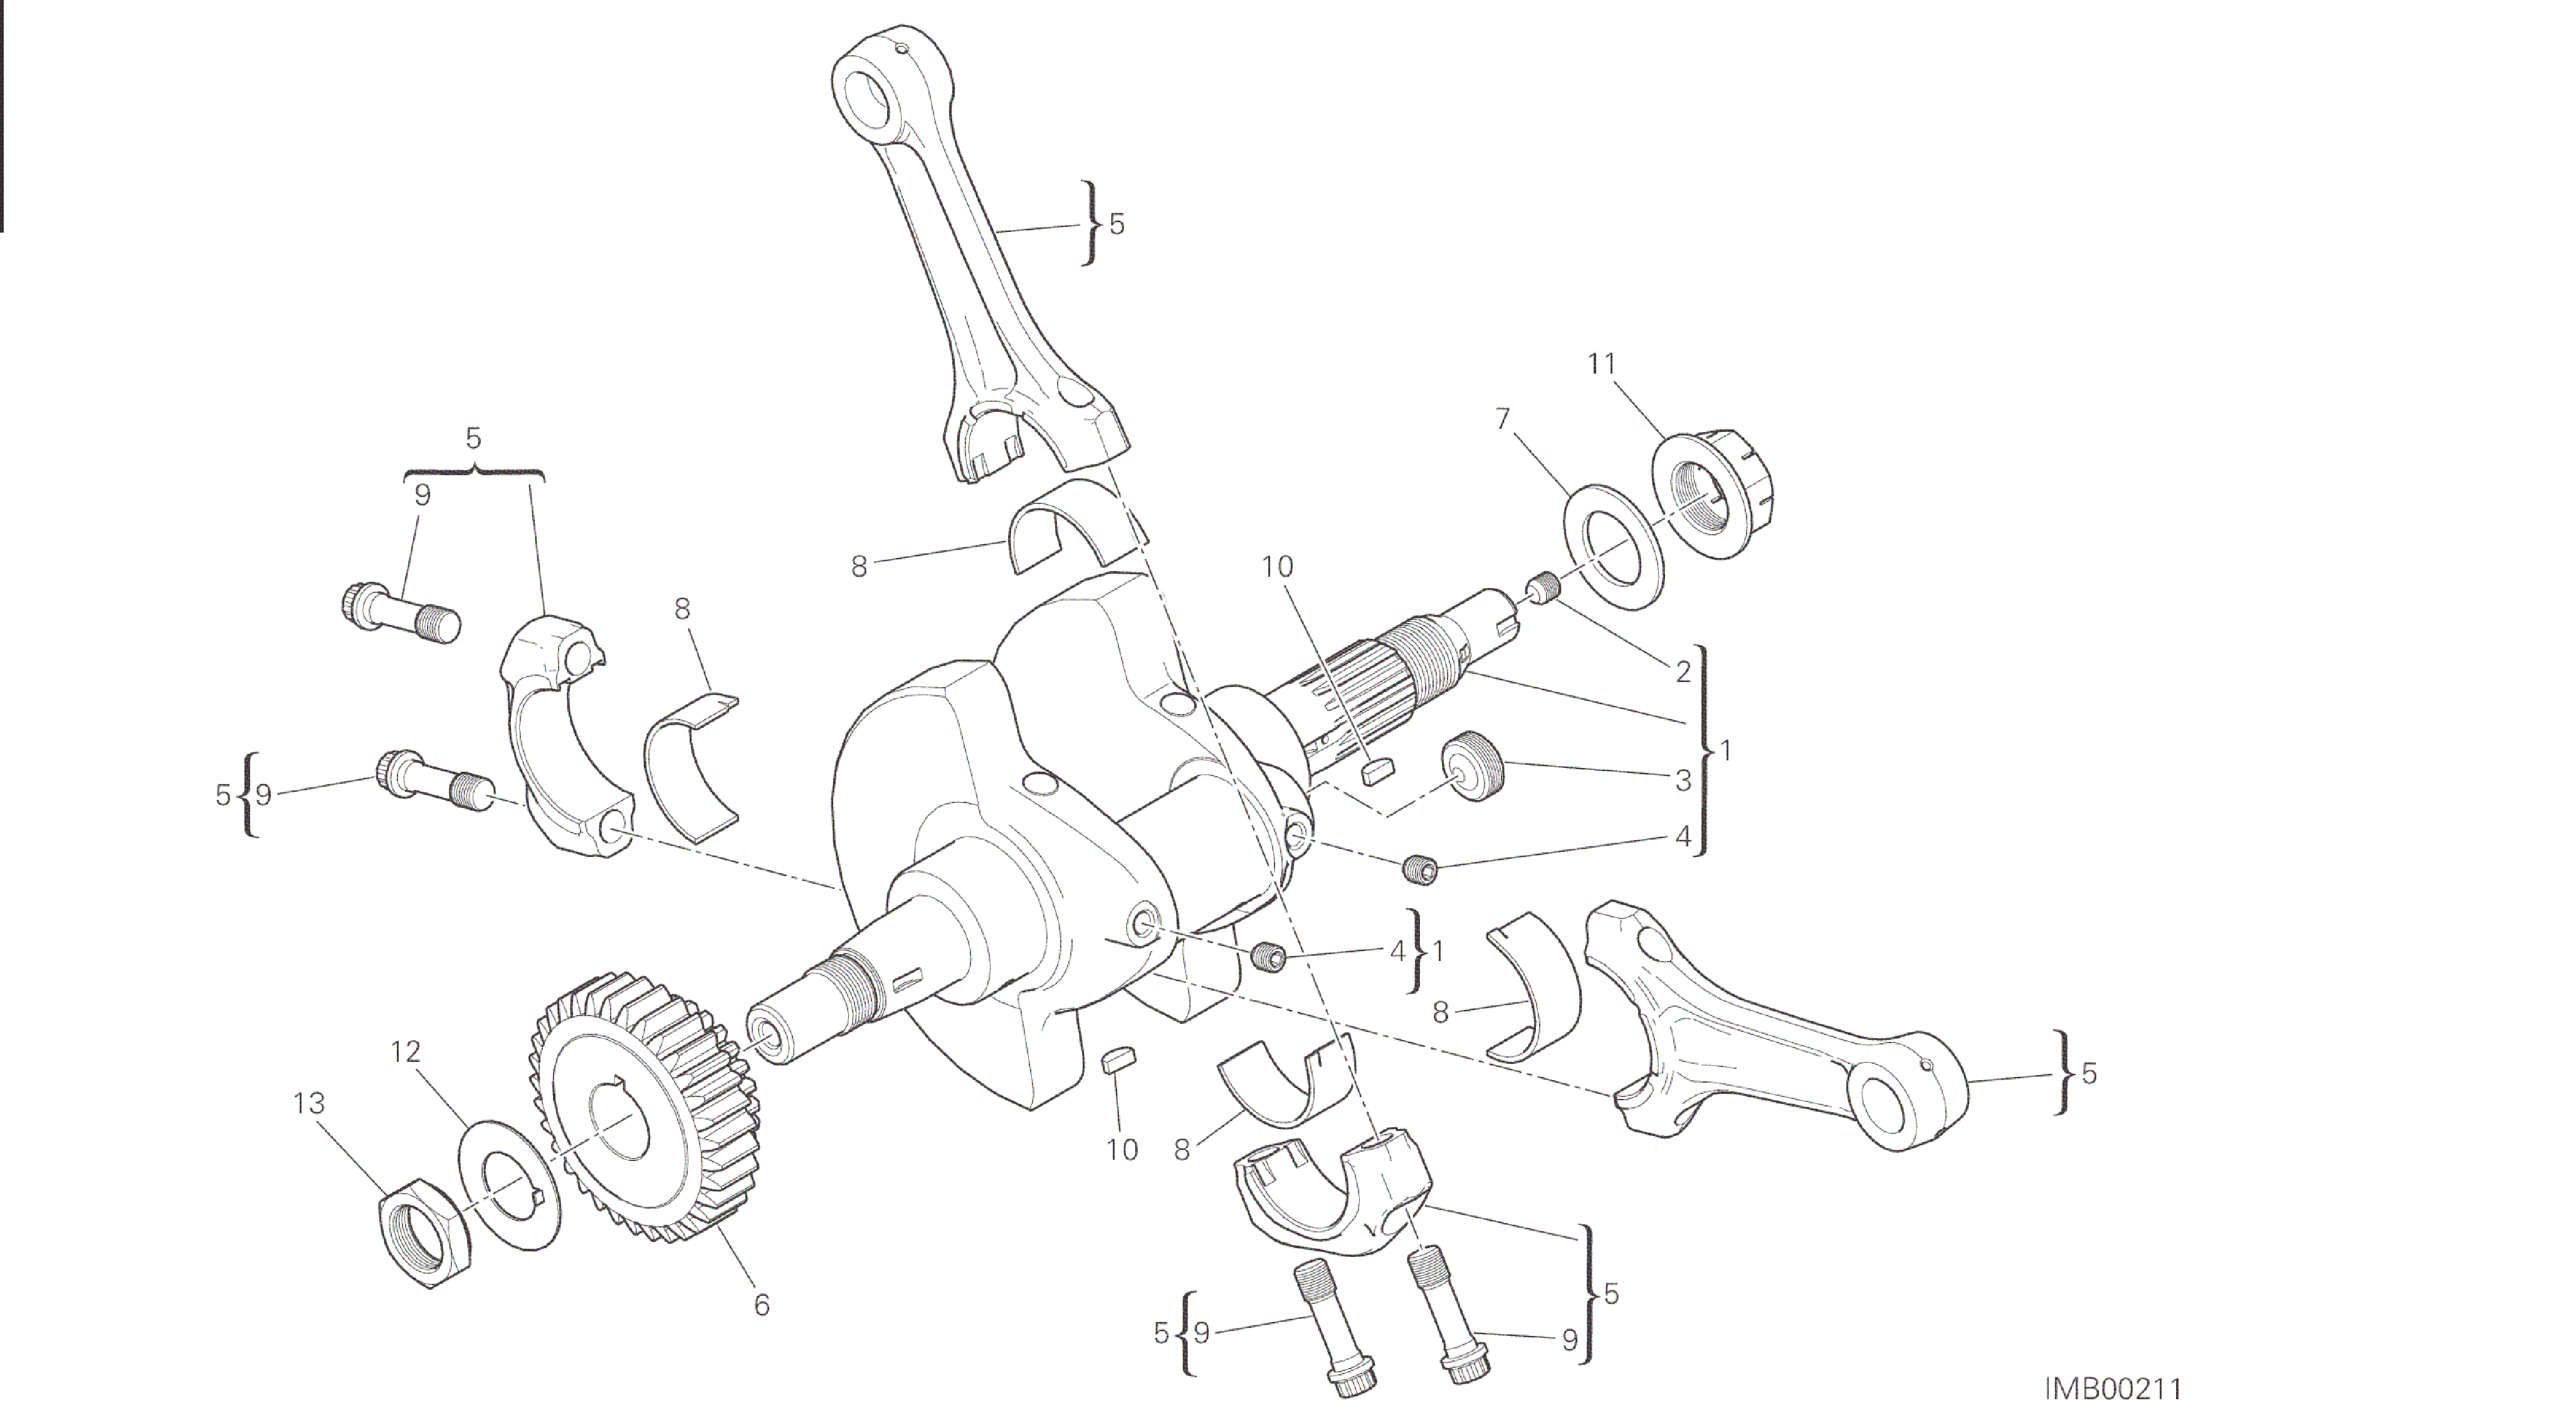 DRAWING 006 - CONNECTING RODS [MOD:M 821]GROUP ENGINE